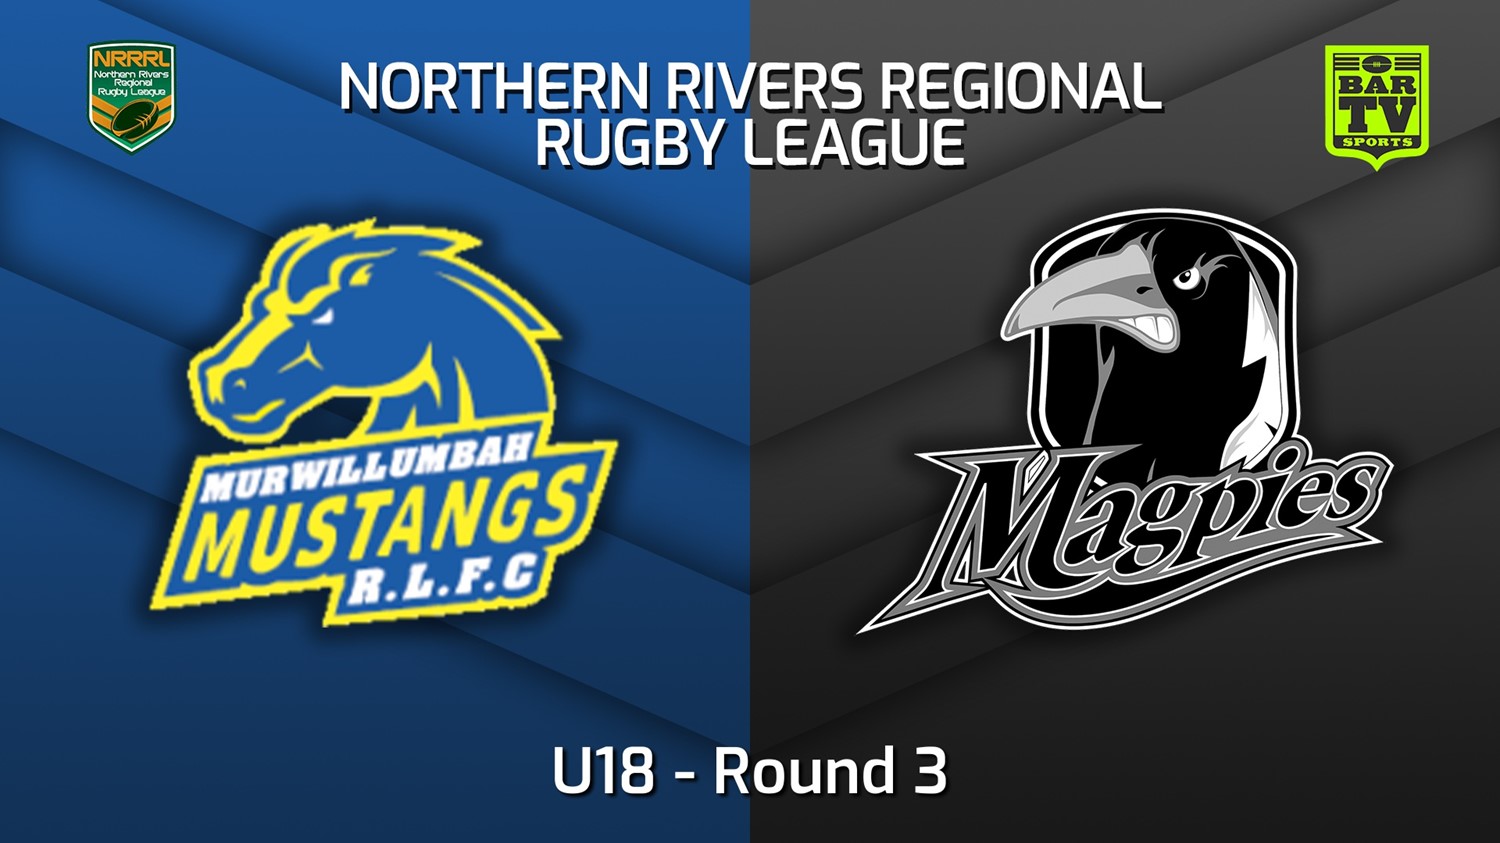 220508-Northern Rivers Round 3 - U18 - Murwillumbah Mustangs v Lower Clarence Magpies Slate Image